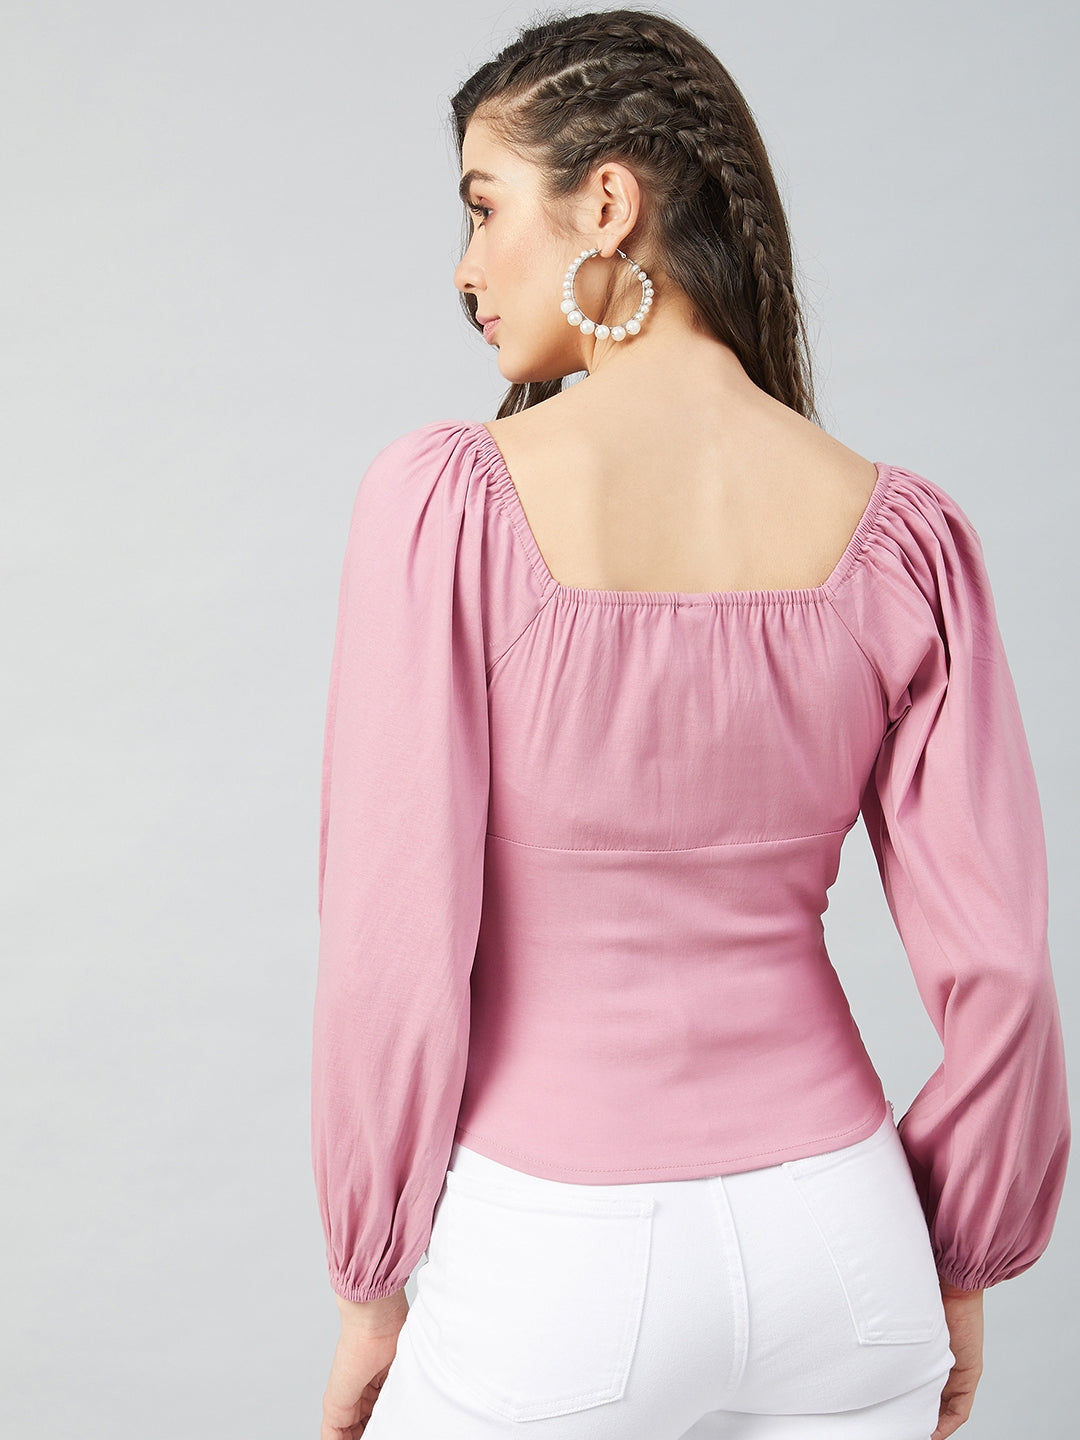 Athena Pink Puff Sleeve Ruched Fitted Top - Athena Lifestyle